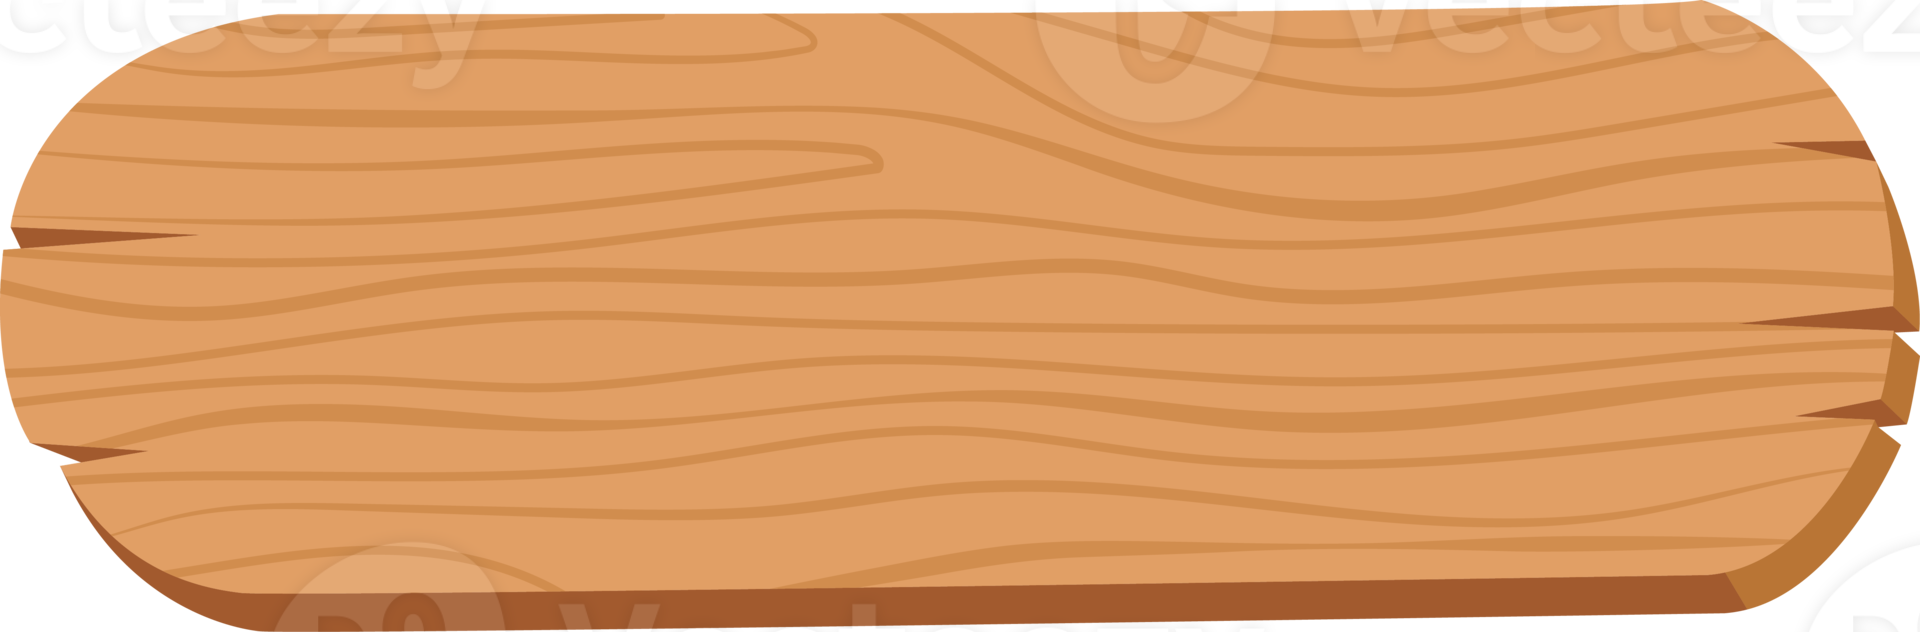 wooden badge banner, wooden plank plate png